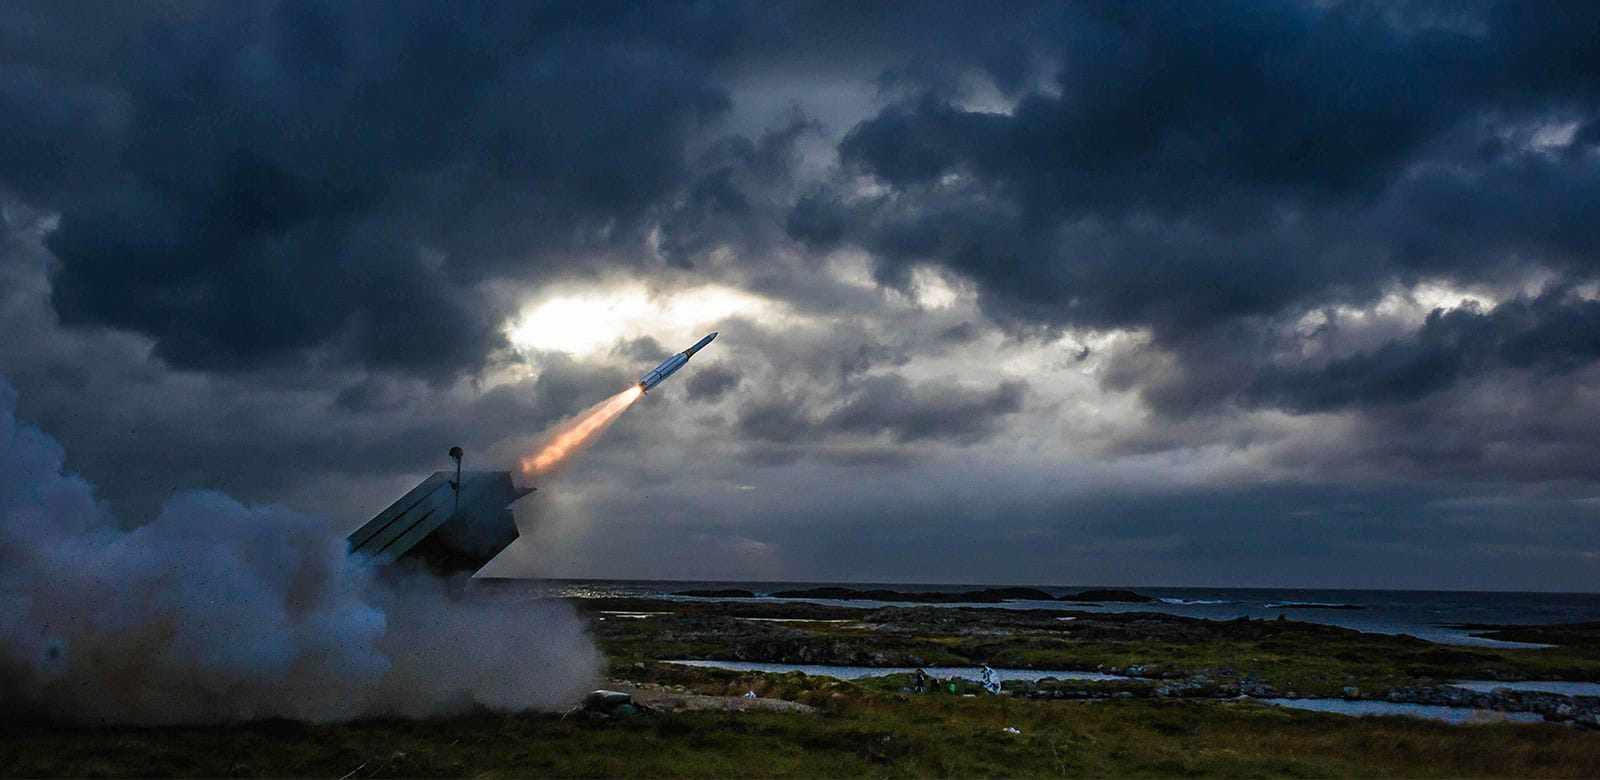 An AMRAAM®-Extended Range missile is fired from a NASAMS™ launcher and successfully engages and destroys a target drone during an international flight test at the Andoya Space Center in Norway. The test validated the complete system, including the AMRAAM-ER missile, NASAMS system, Sentinel radar and Kongsberg’s Fire Distribution Center.